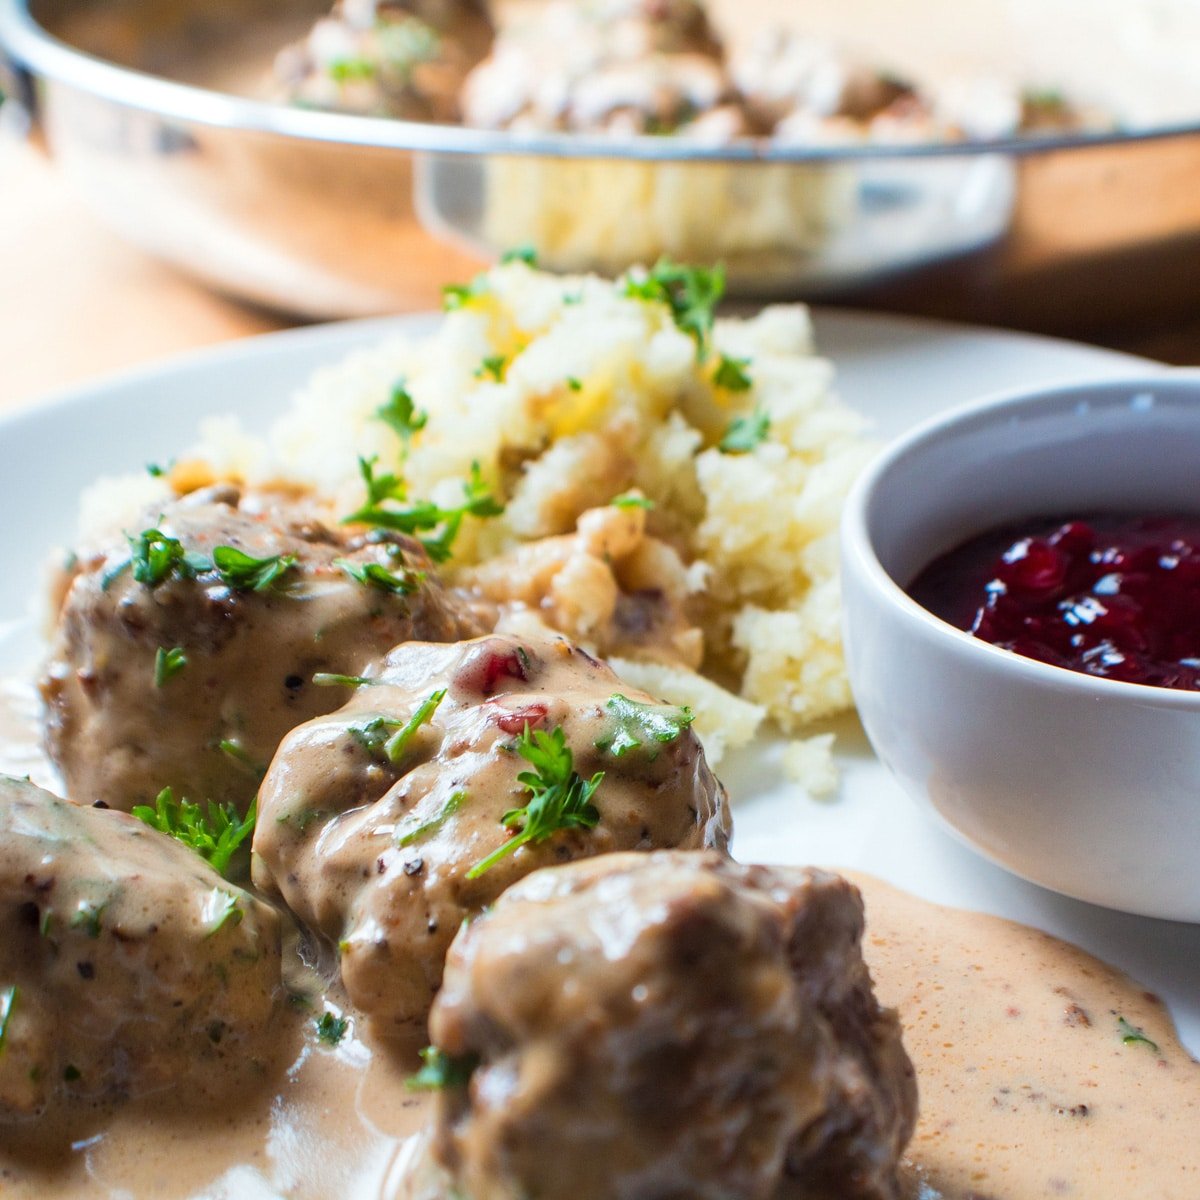 Hearty Swedish meatballs served with gravy and lingonberry jam on white plate.